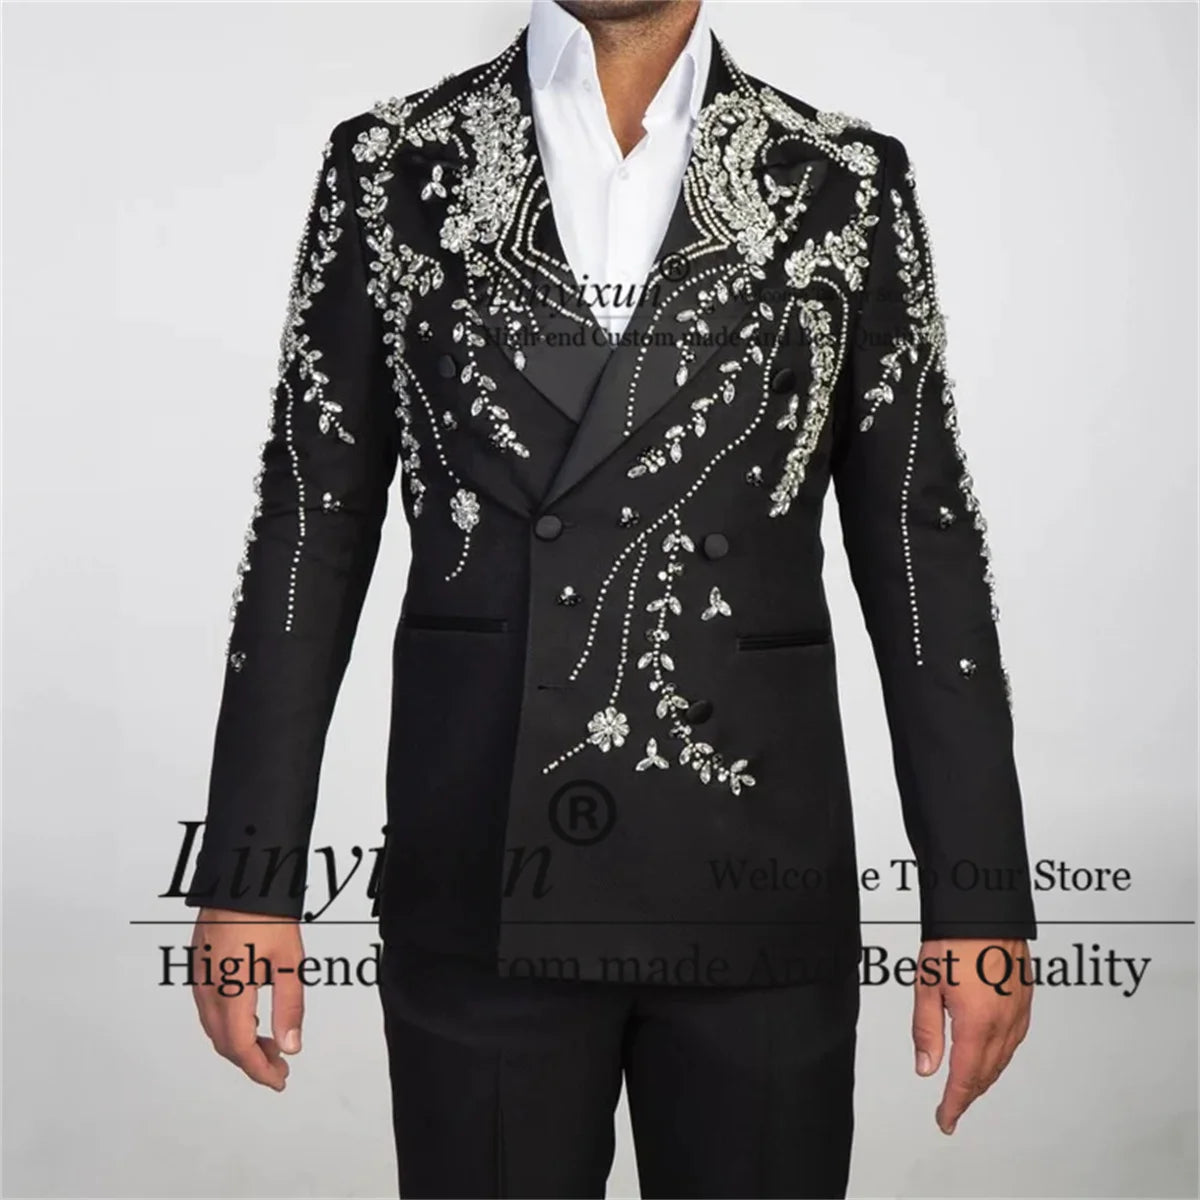 Luxury Beaded Wedding Suits For Men Double Breasted Male Prom Blazers Outfits 2 Pieces Sets Groom Tuxedos Slim Fit Costume Homme